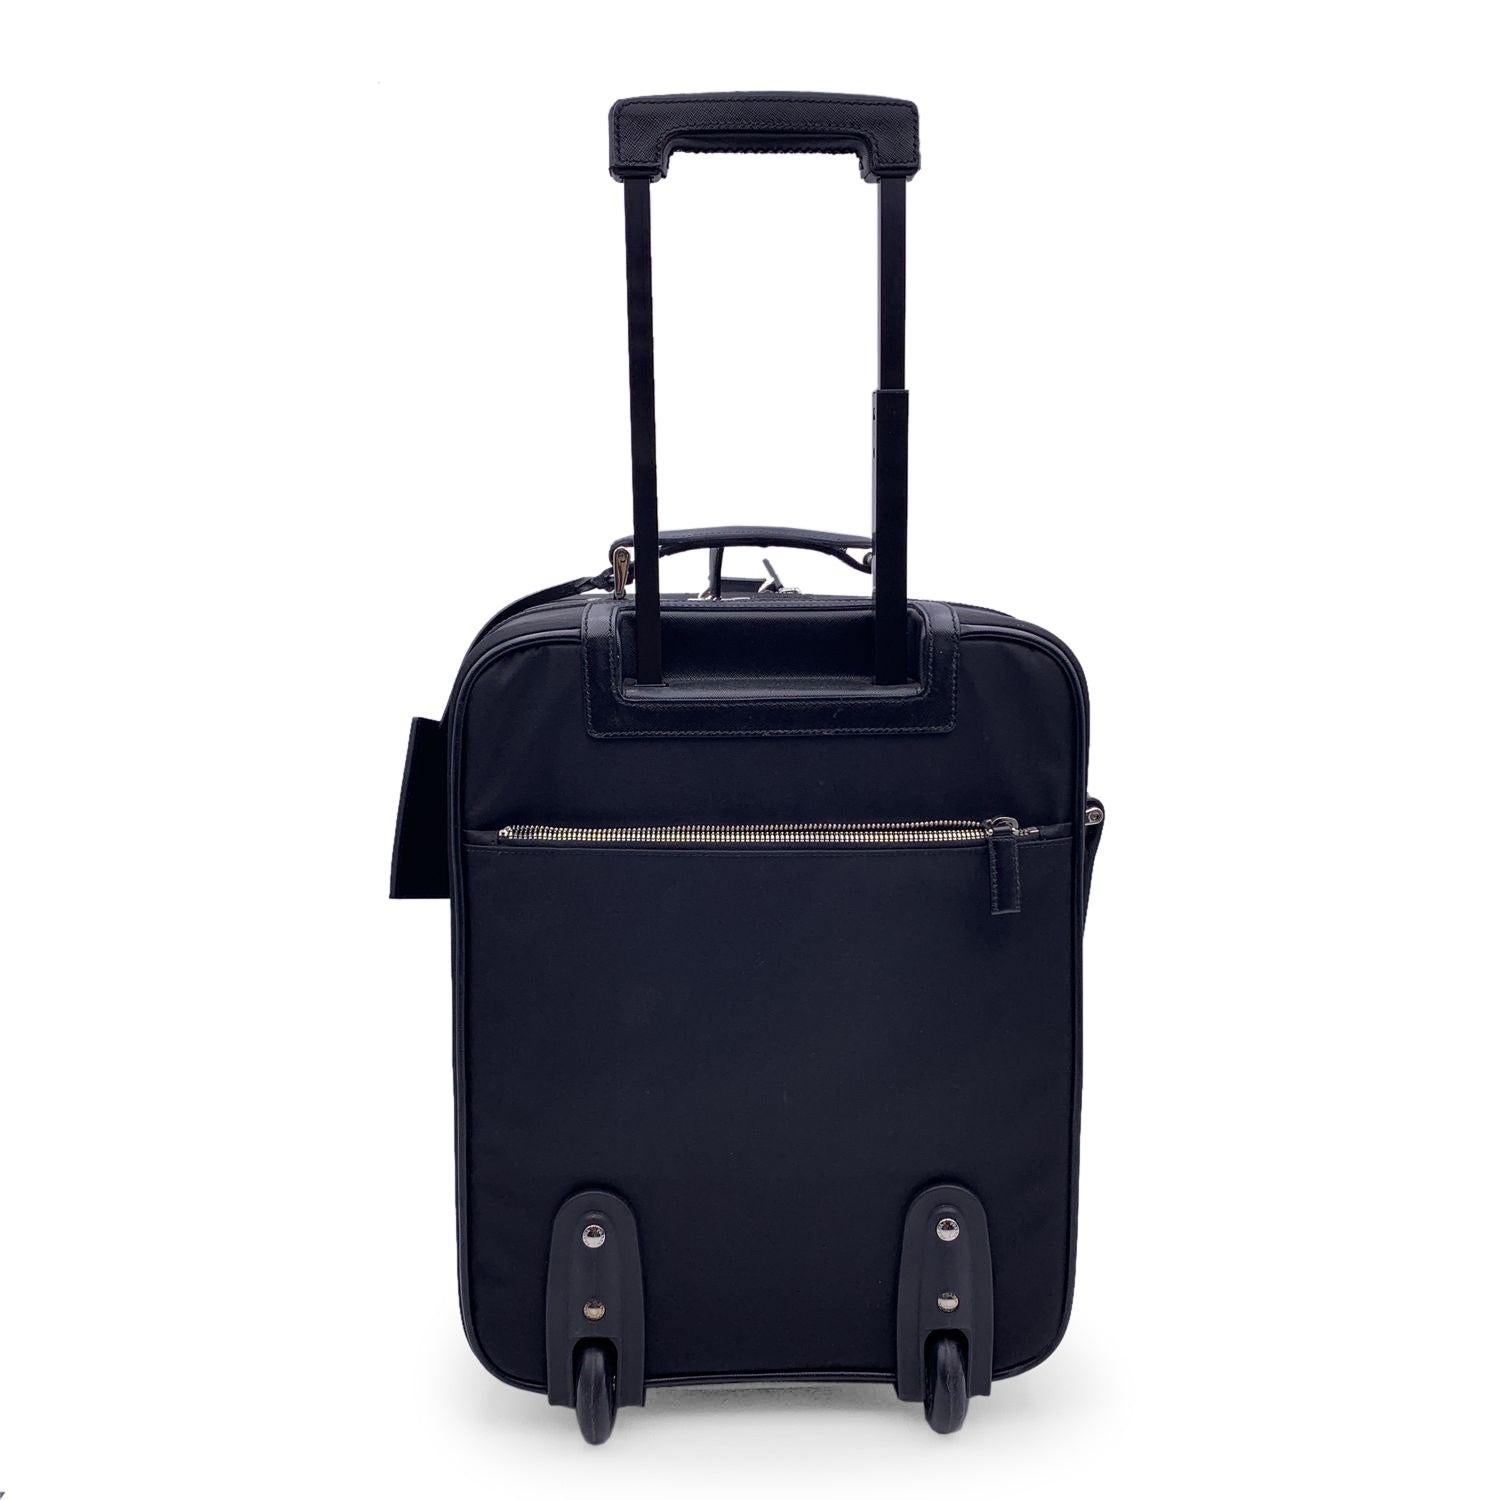 This beautiful Bag will come with a Certificate of Authenticity provided by Entrupy. The certificate will be provided at no further cost. Gorgeous Prada Rolling Luggage Trolley travel bag. Black nylon, saffiano leather trim and fabric lining. Prada